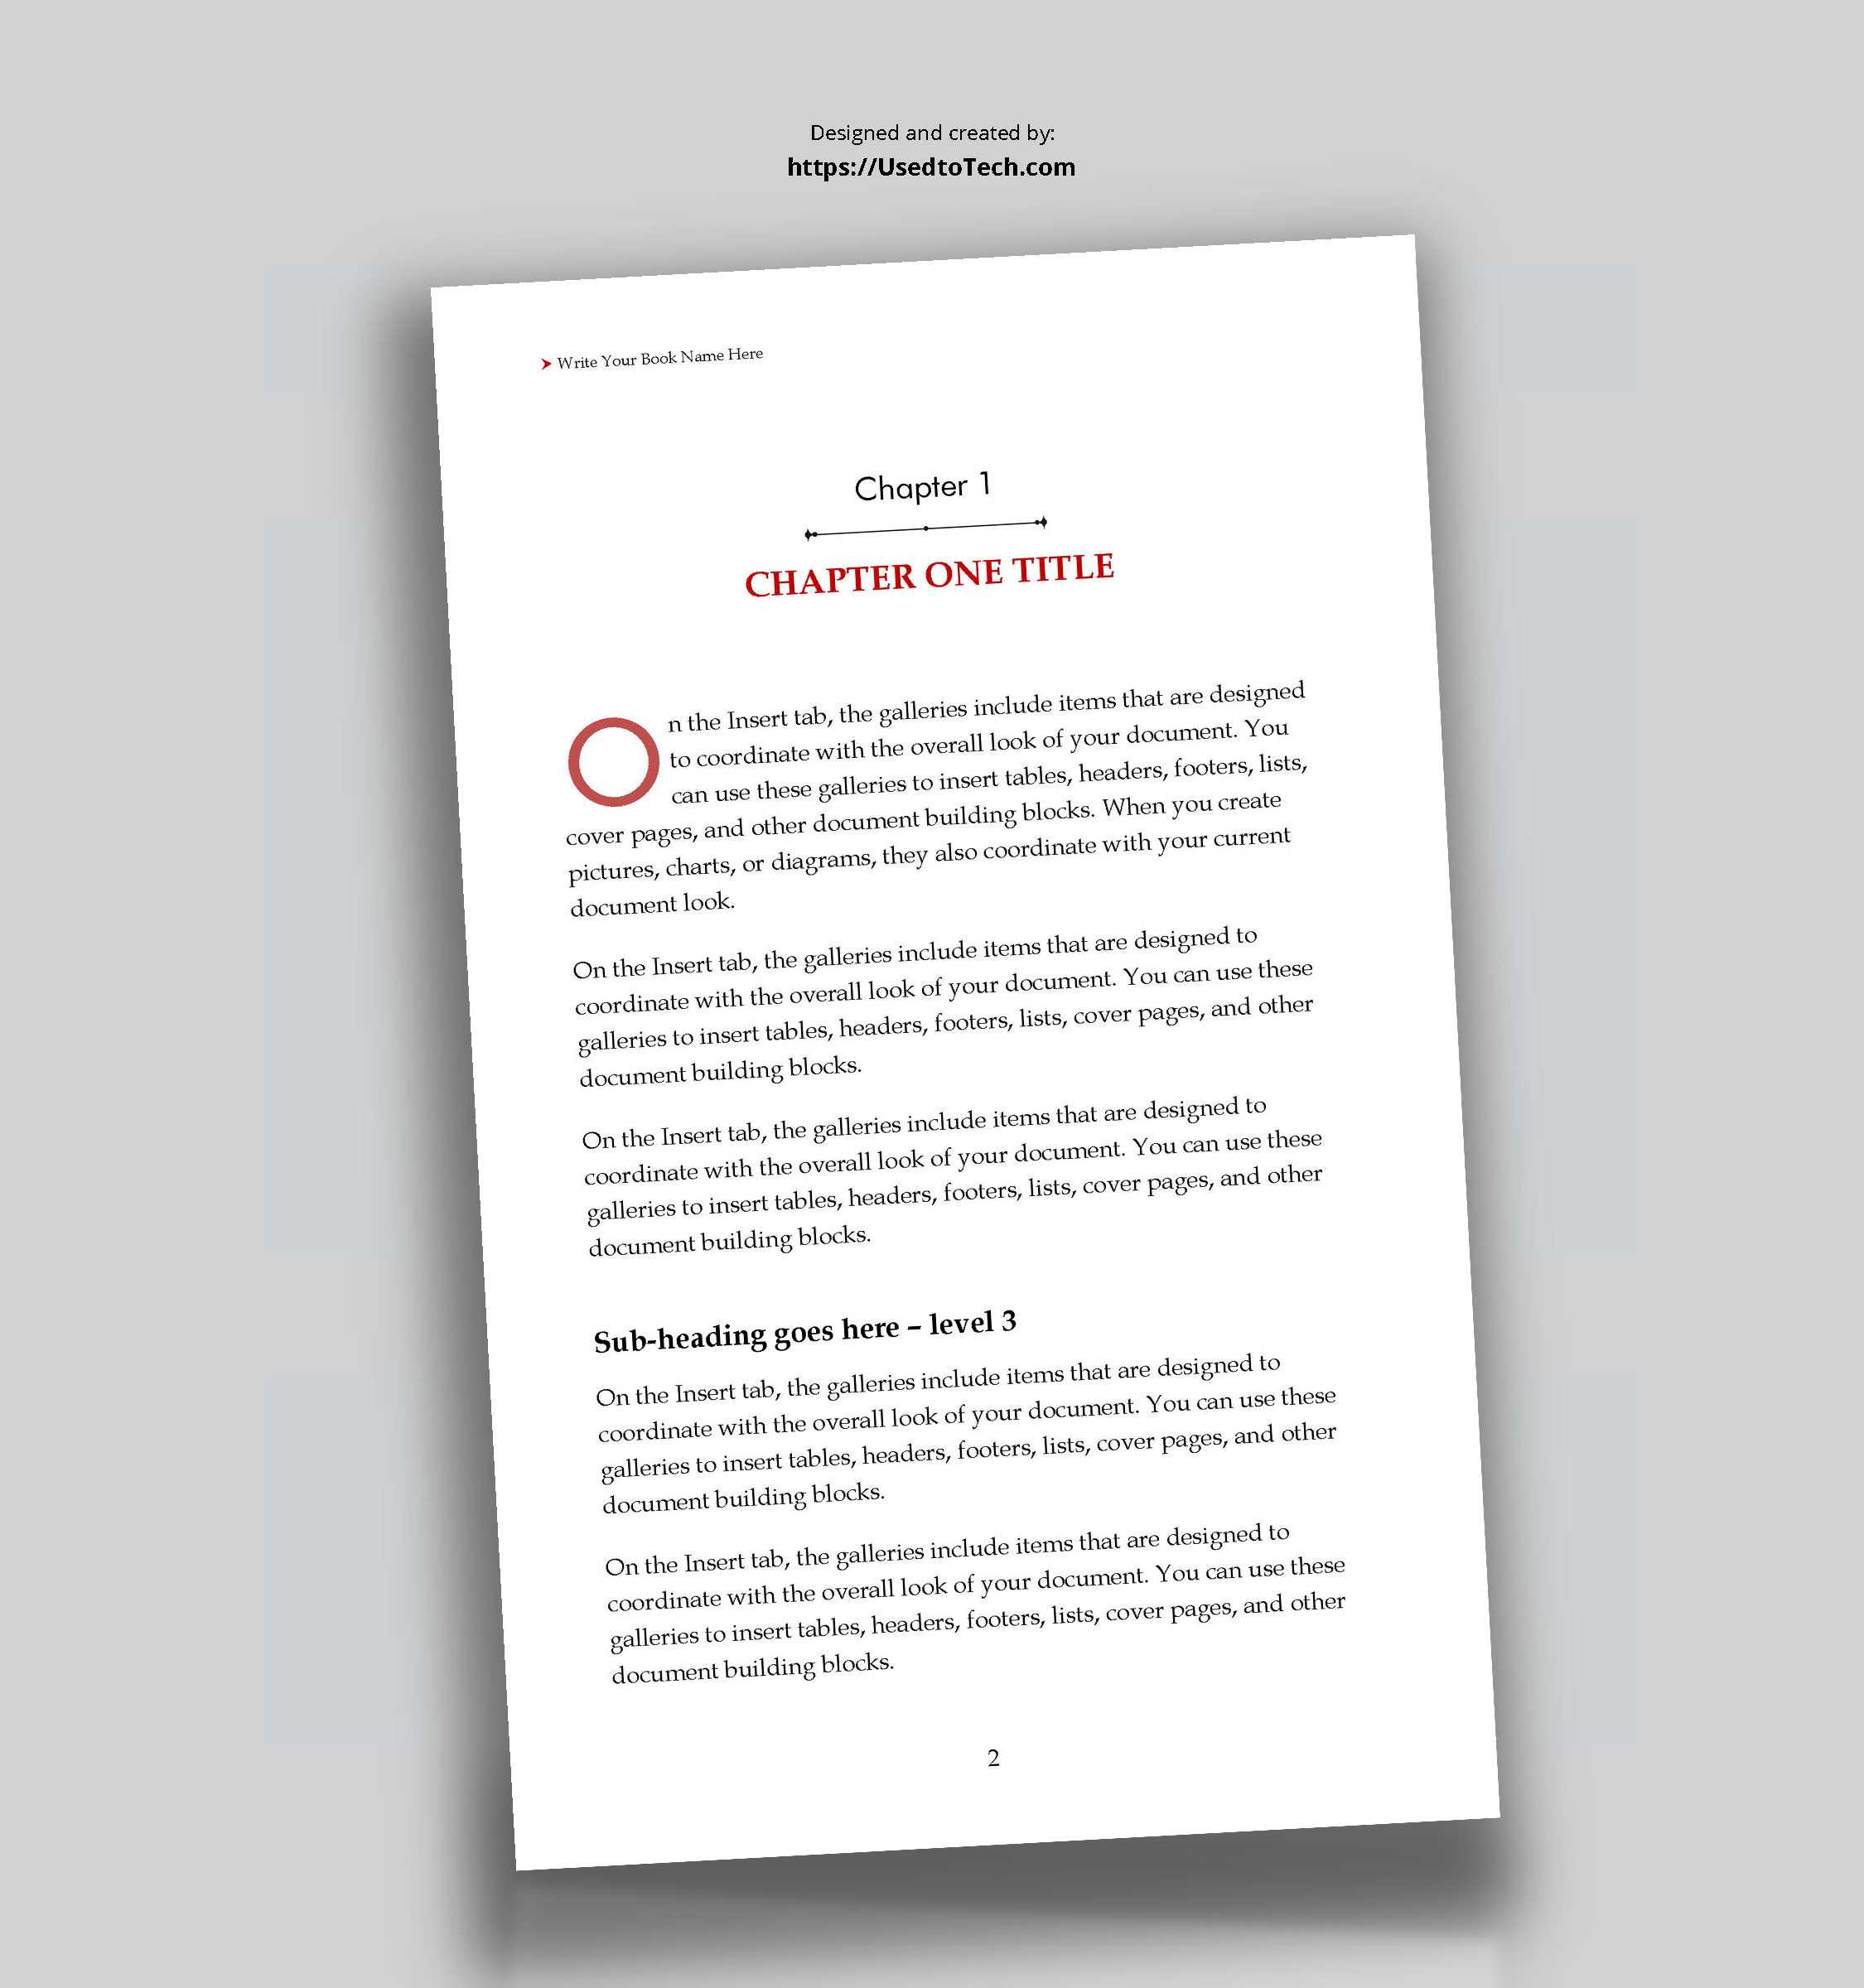 5 X 8 Editable Book Template In Word – Used To Tech With How To Create A Book Template In Word